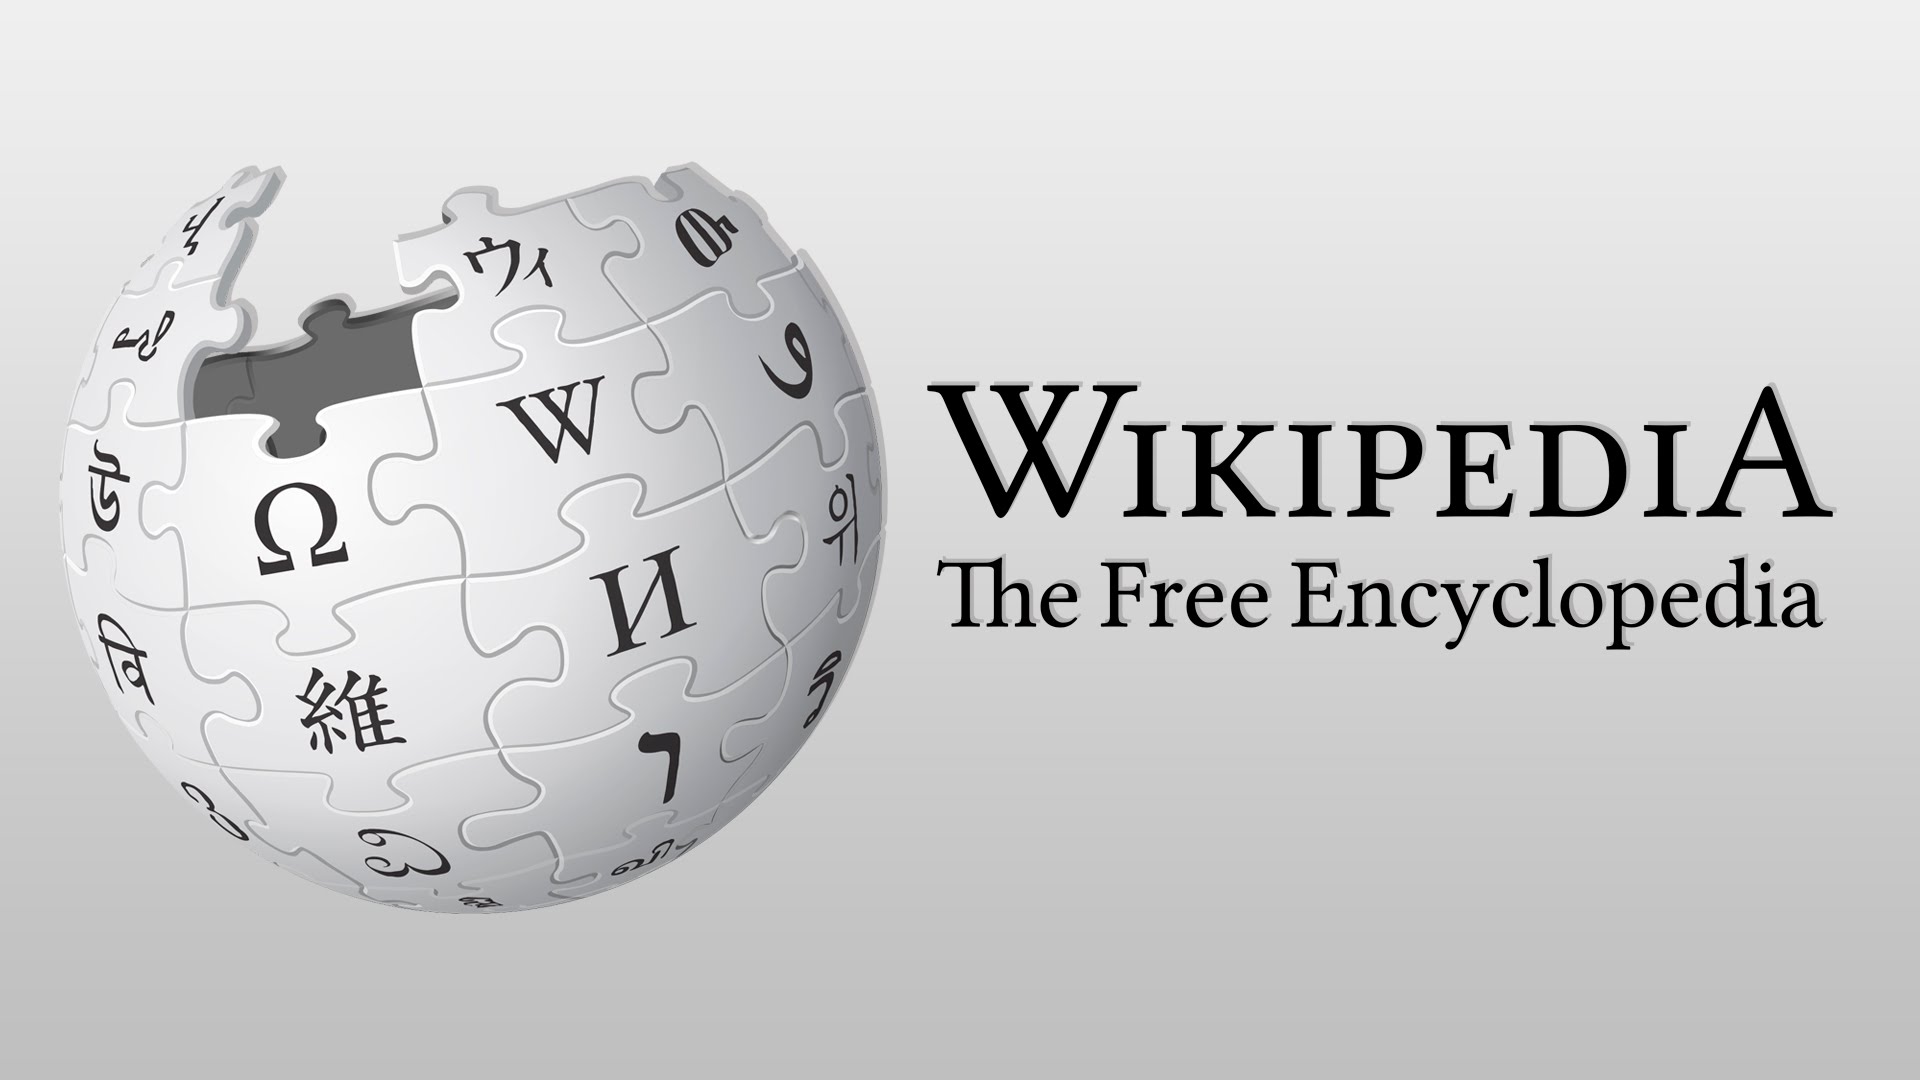 Wikipedia Refuses to Comply with Age Checks